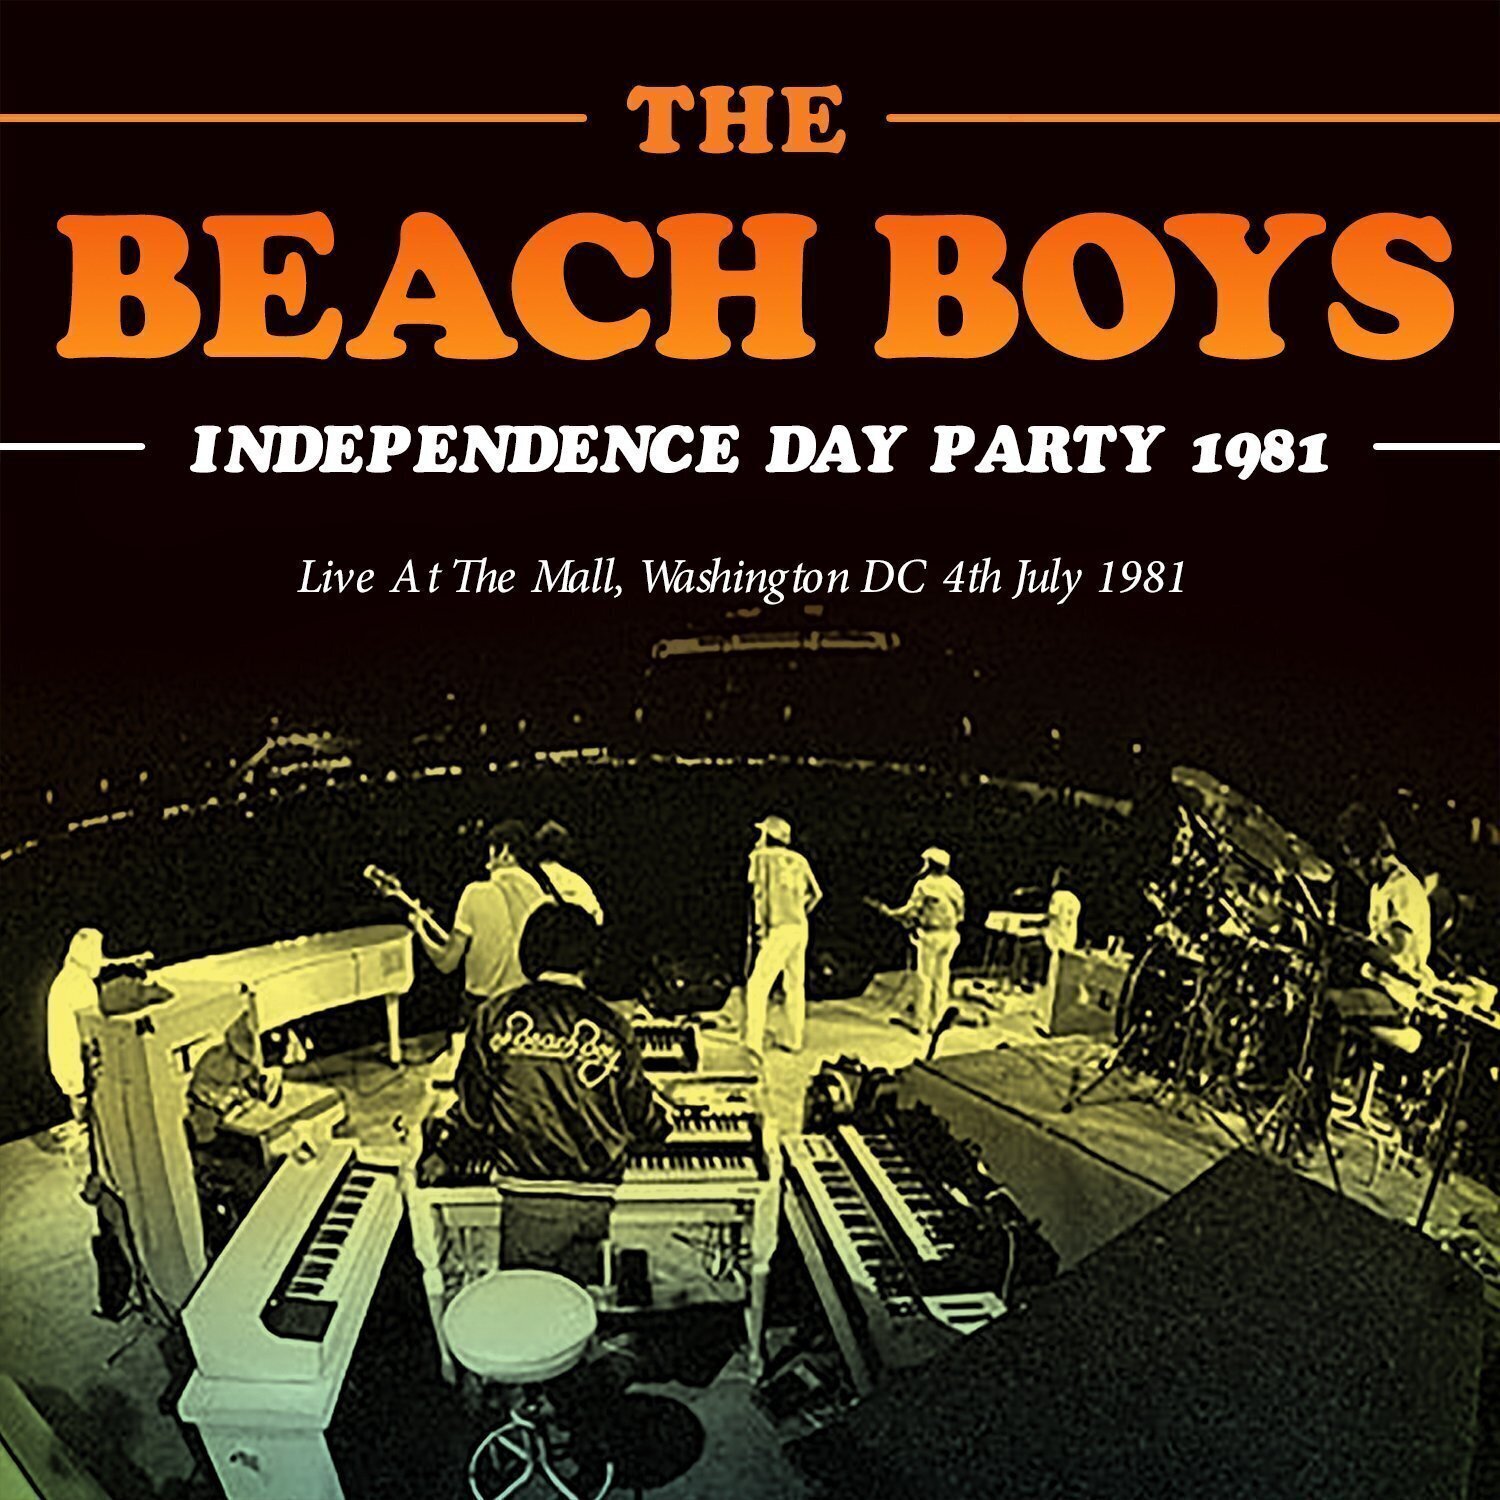 Vinyl Record The Beach Boys - Independence Day Party 1981 (2 LP)